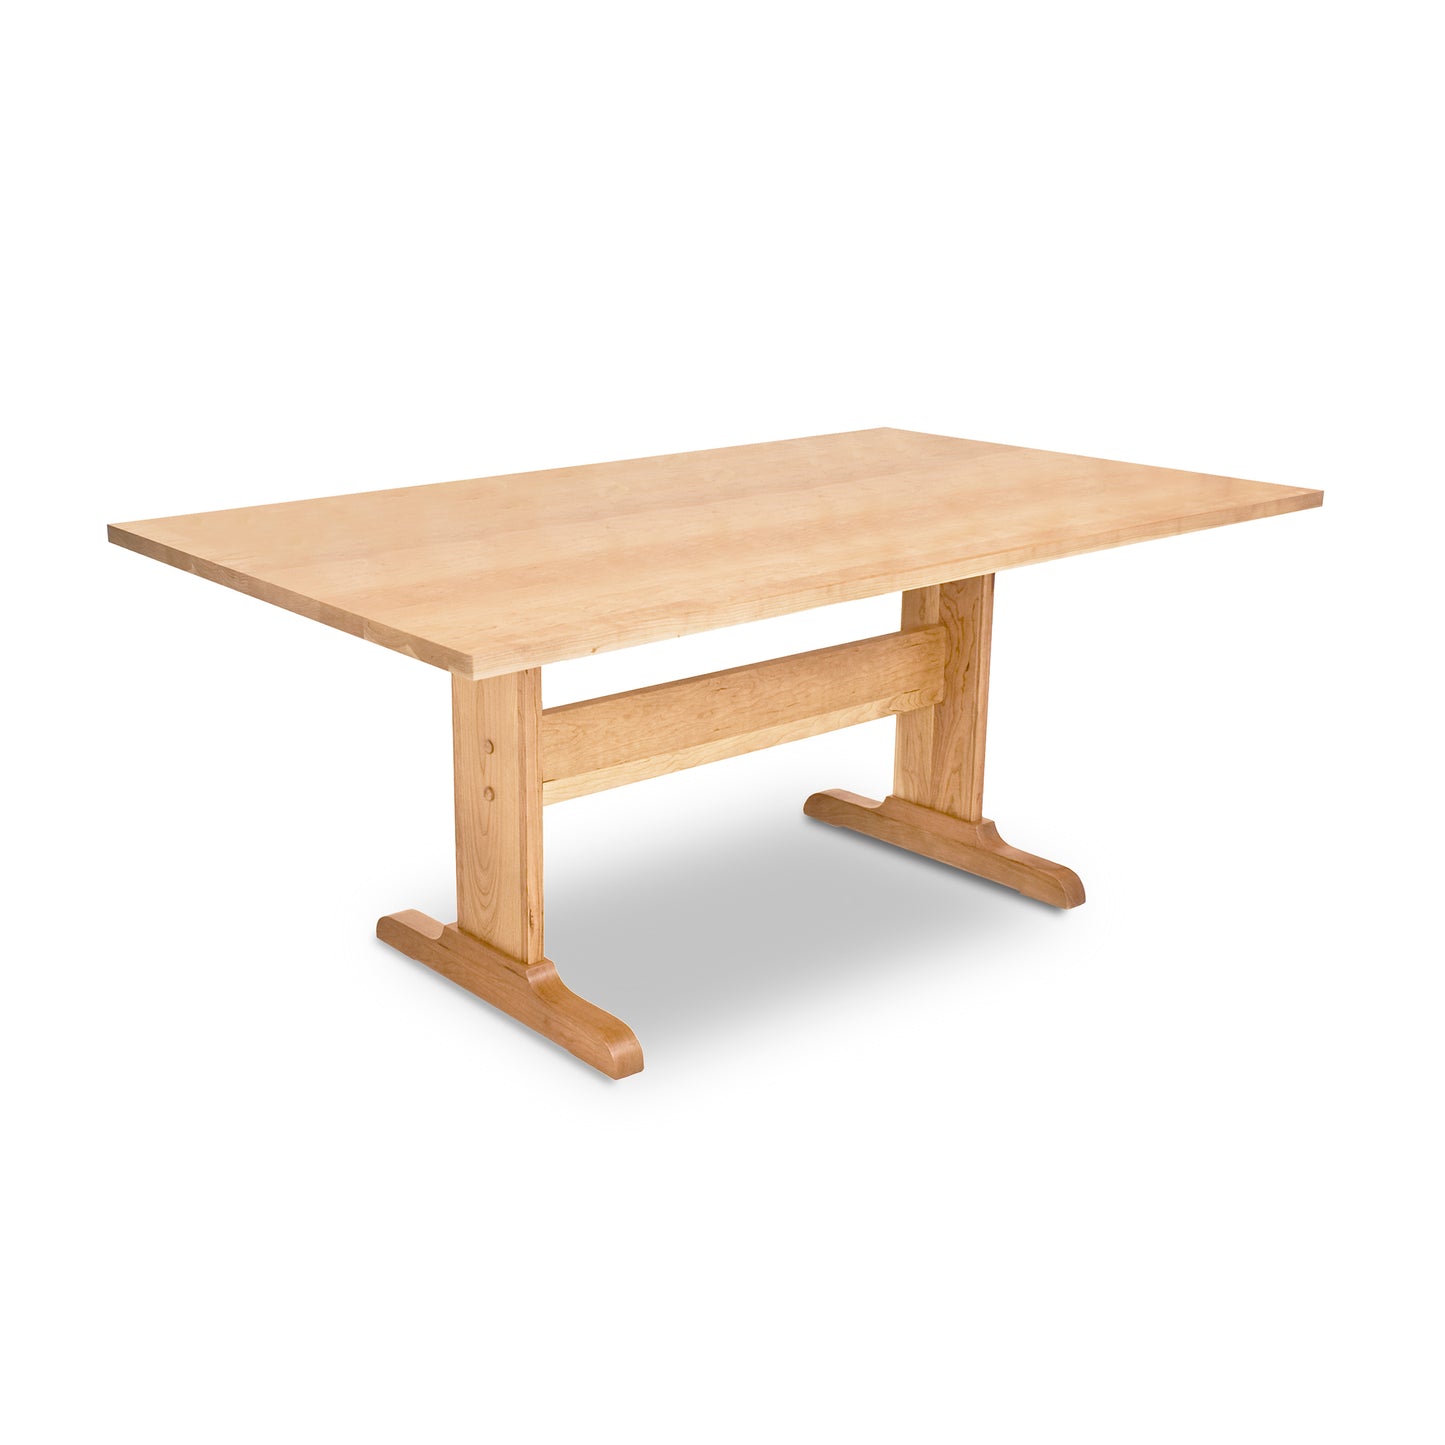 An eco-friendly Rectangular Trestle Solid Top Table with two legs on a white background, made from sustainably harvested woods by Lyndon Furniture.